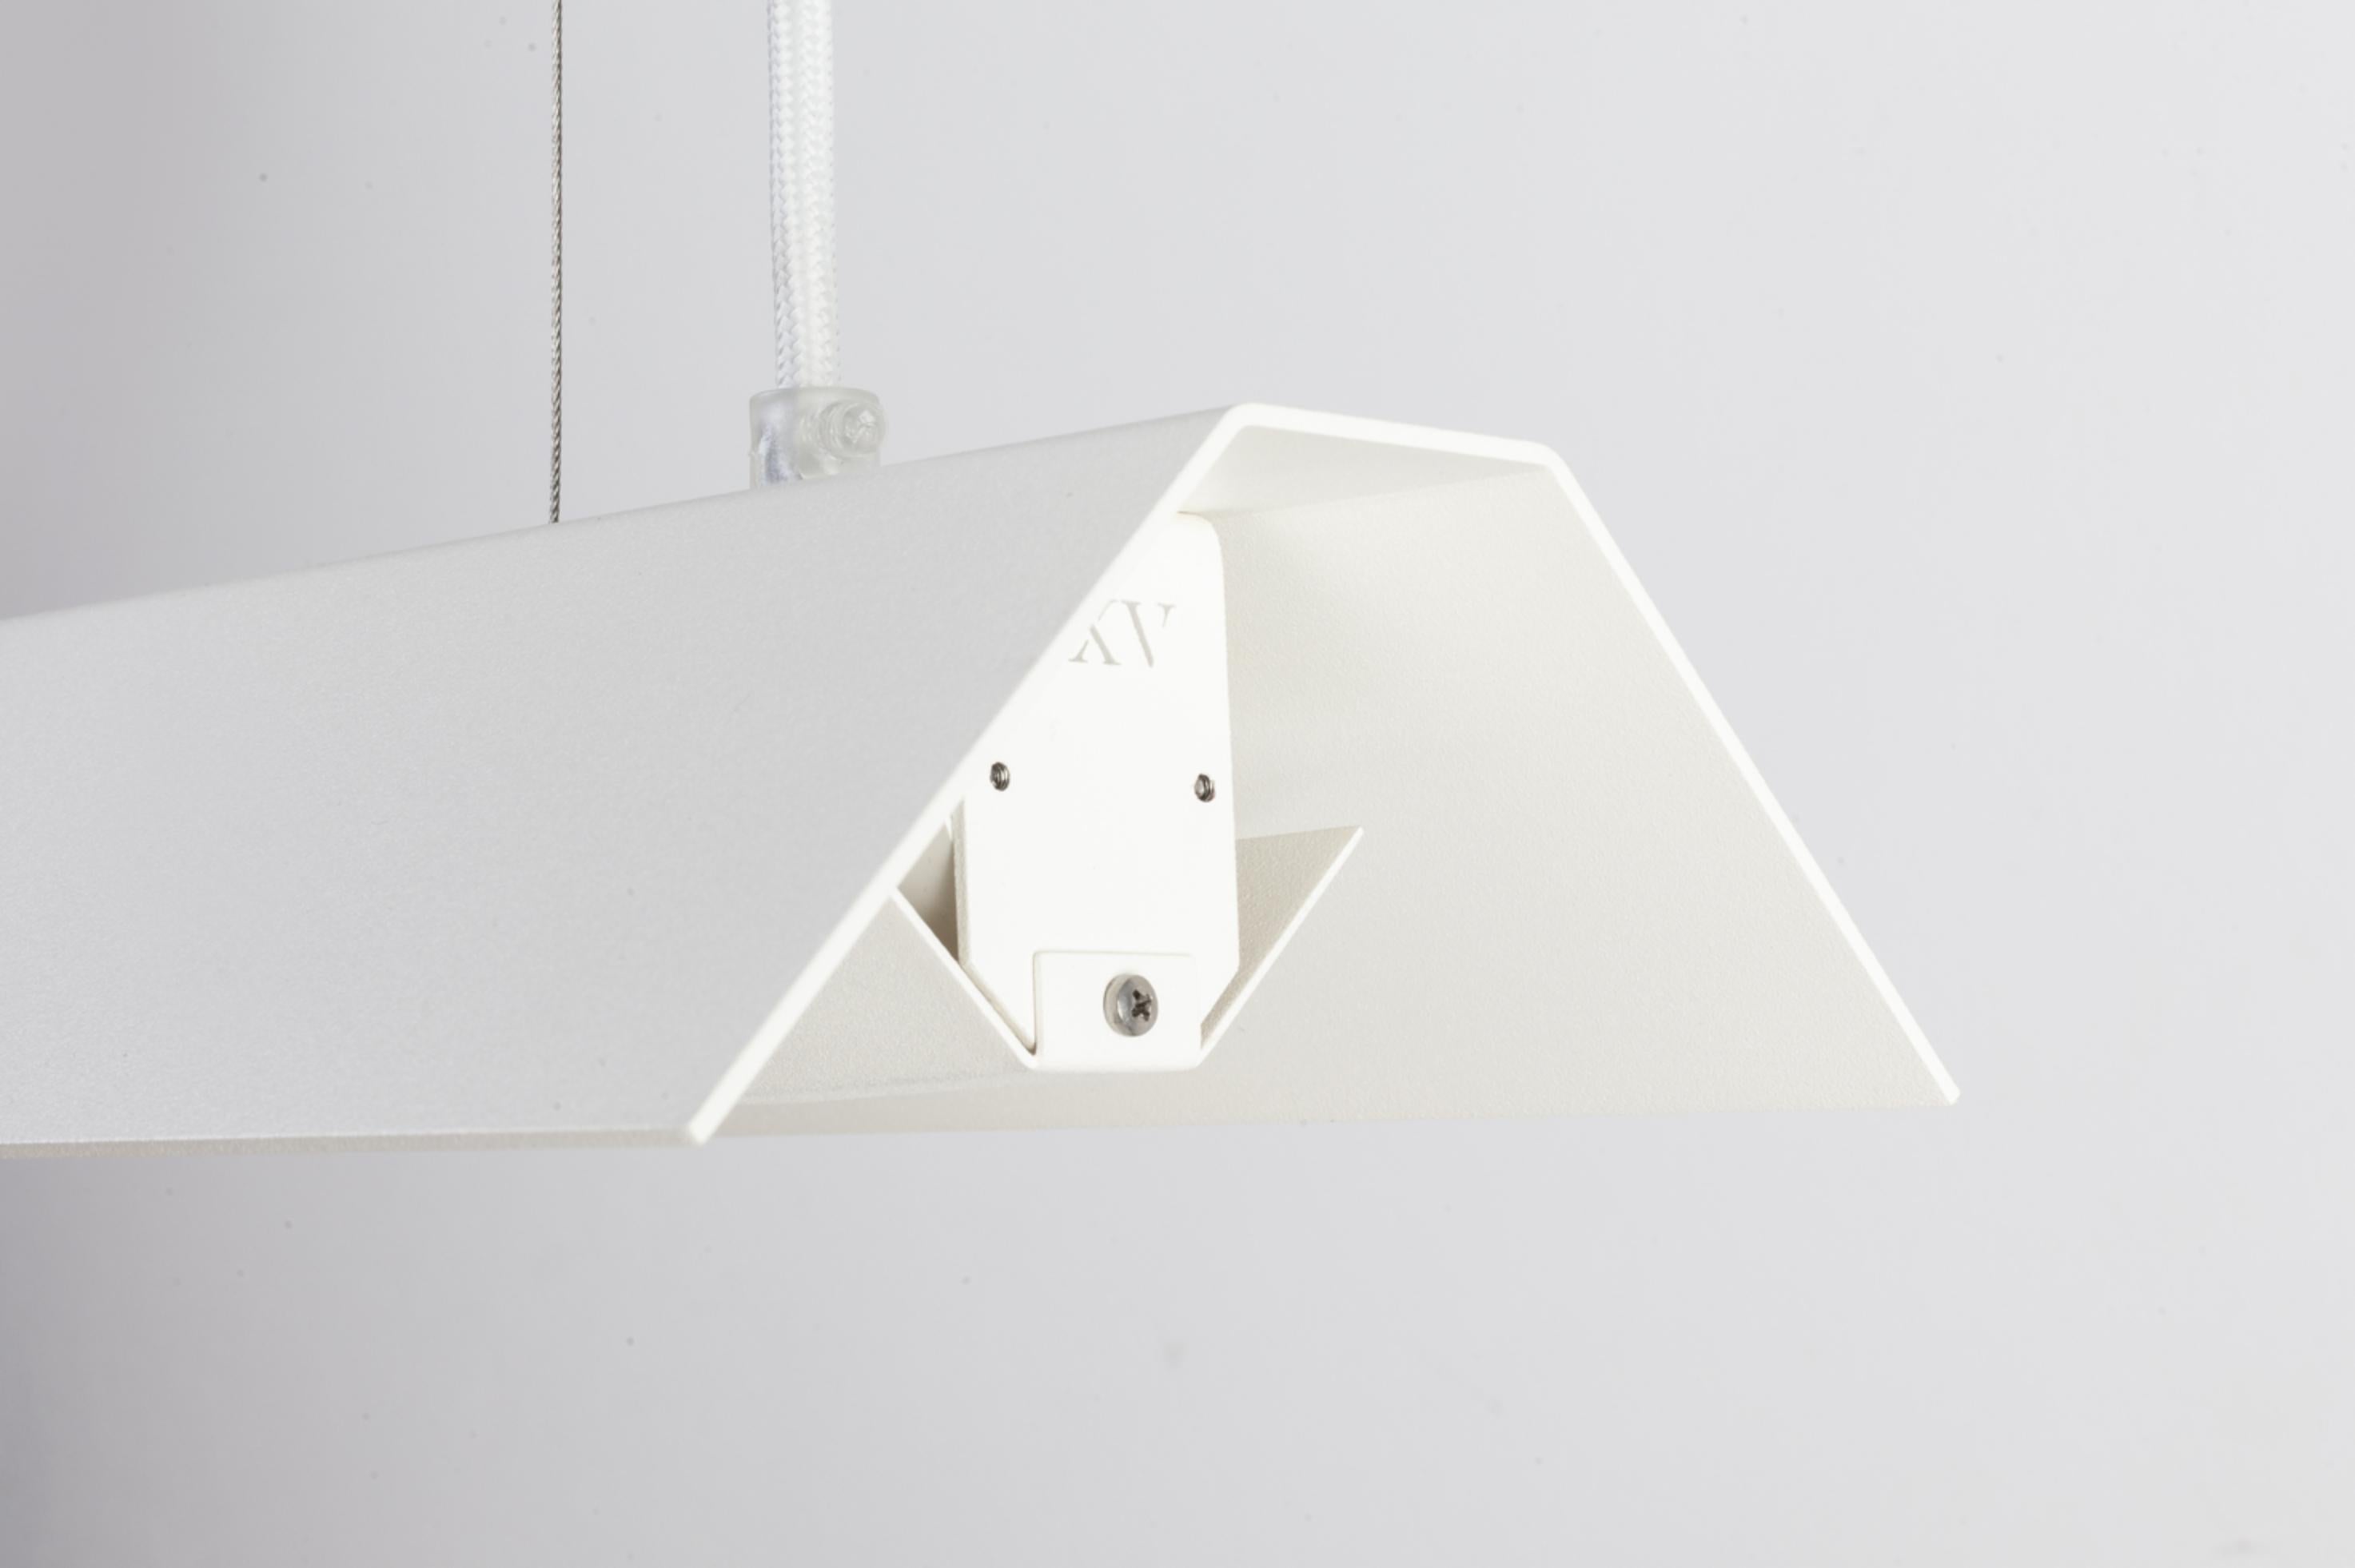 Medium Misalliance Ral pure white suspended light by Lexavala
Dimensions: D 16 x W 100 x H 8 cm
Materials: powder coated aluminium.

There are two lenghts of socket covers, extending over the LED. Two short are to be found in Suspended and